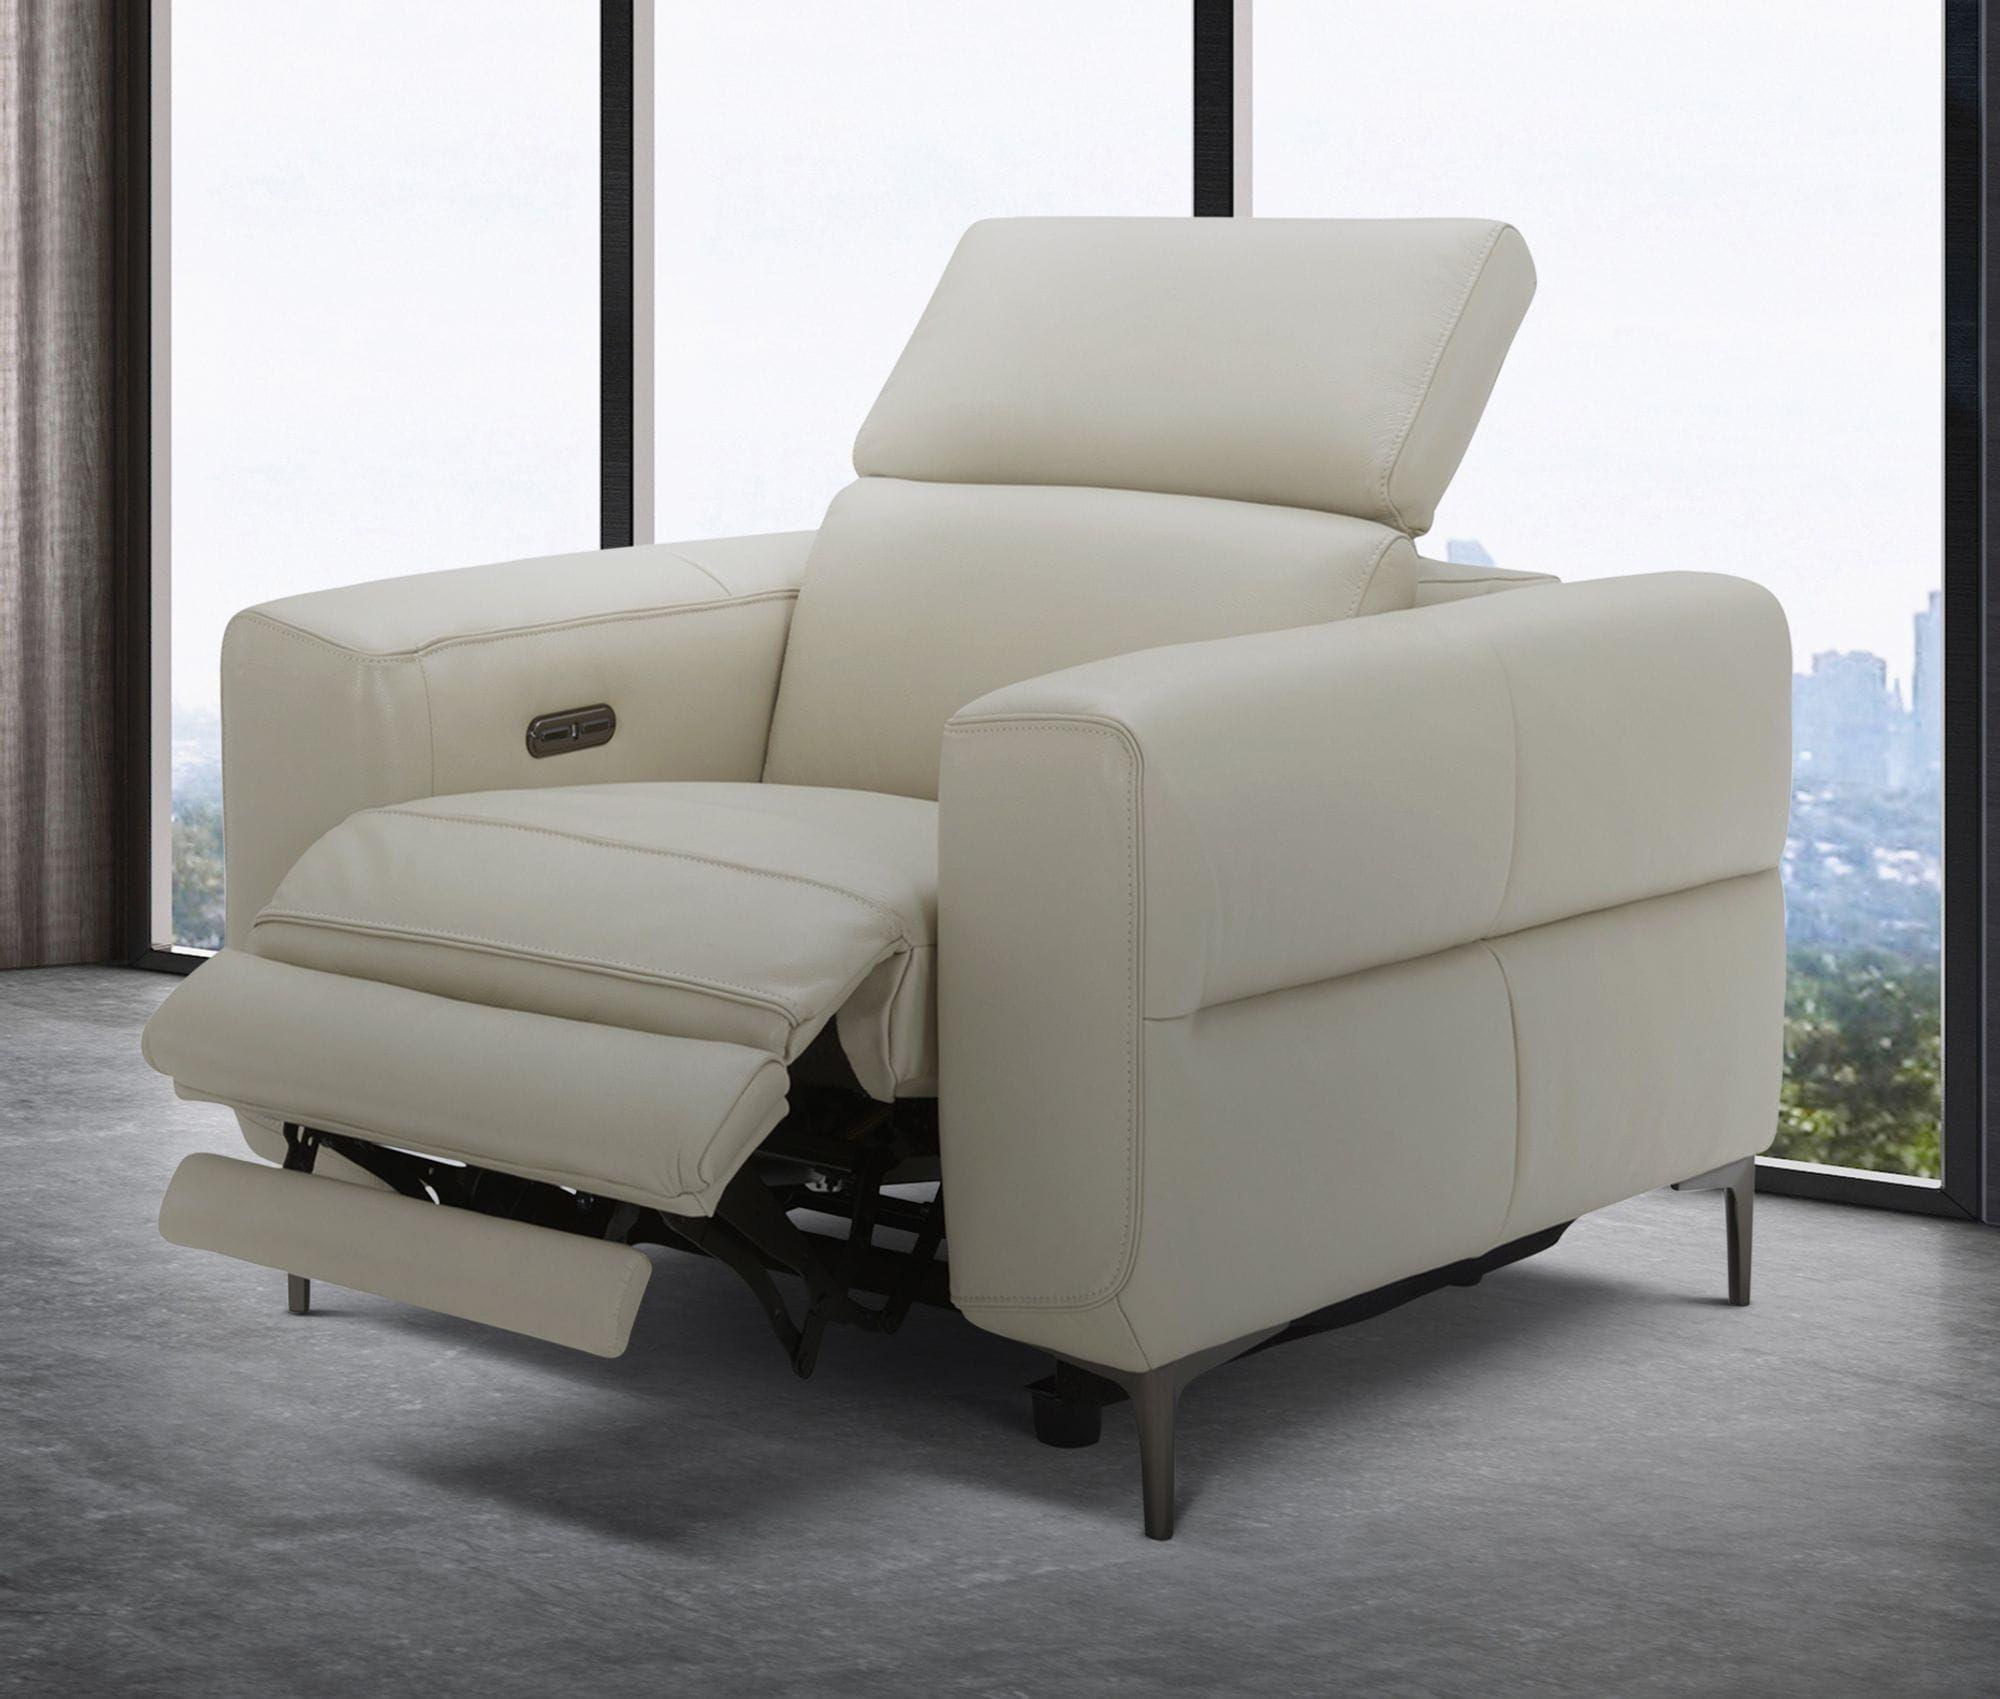 Contemporary, Modern Recliner Chair VGKMKM.618H-GRY-CH VGKMKM.618H-GRY-CH in Light Grey Genuine Leather